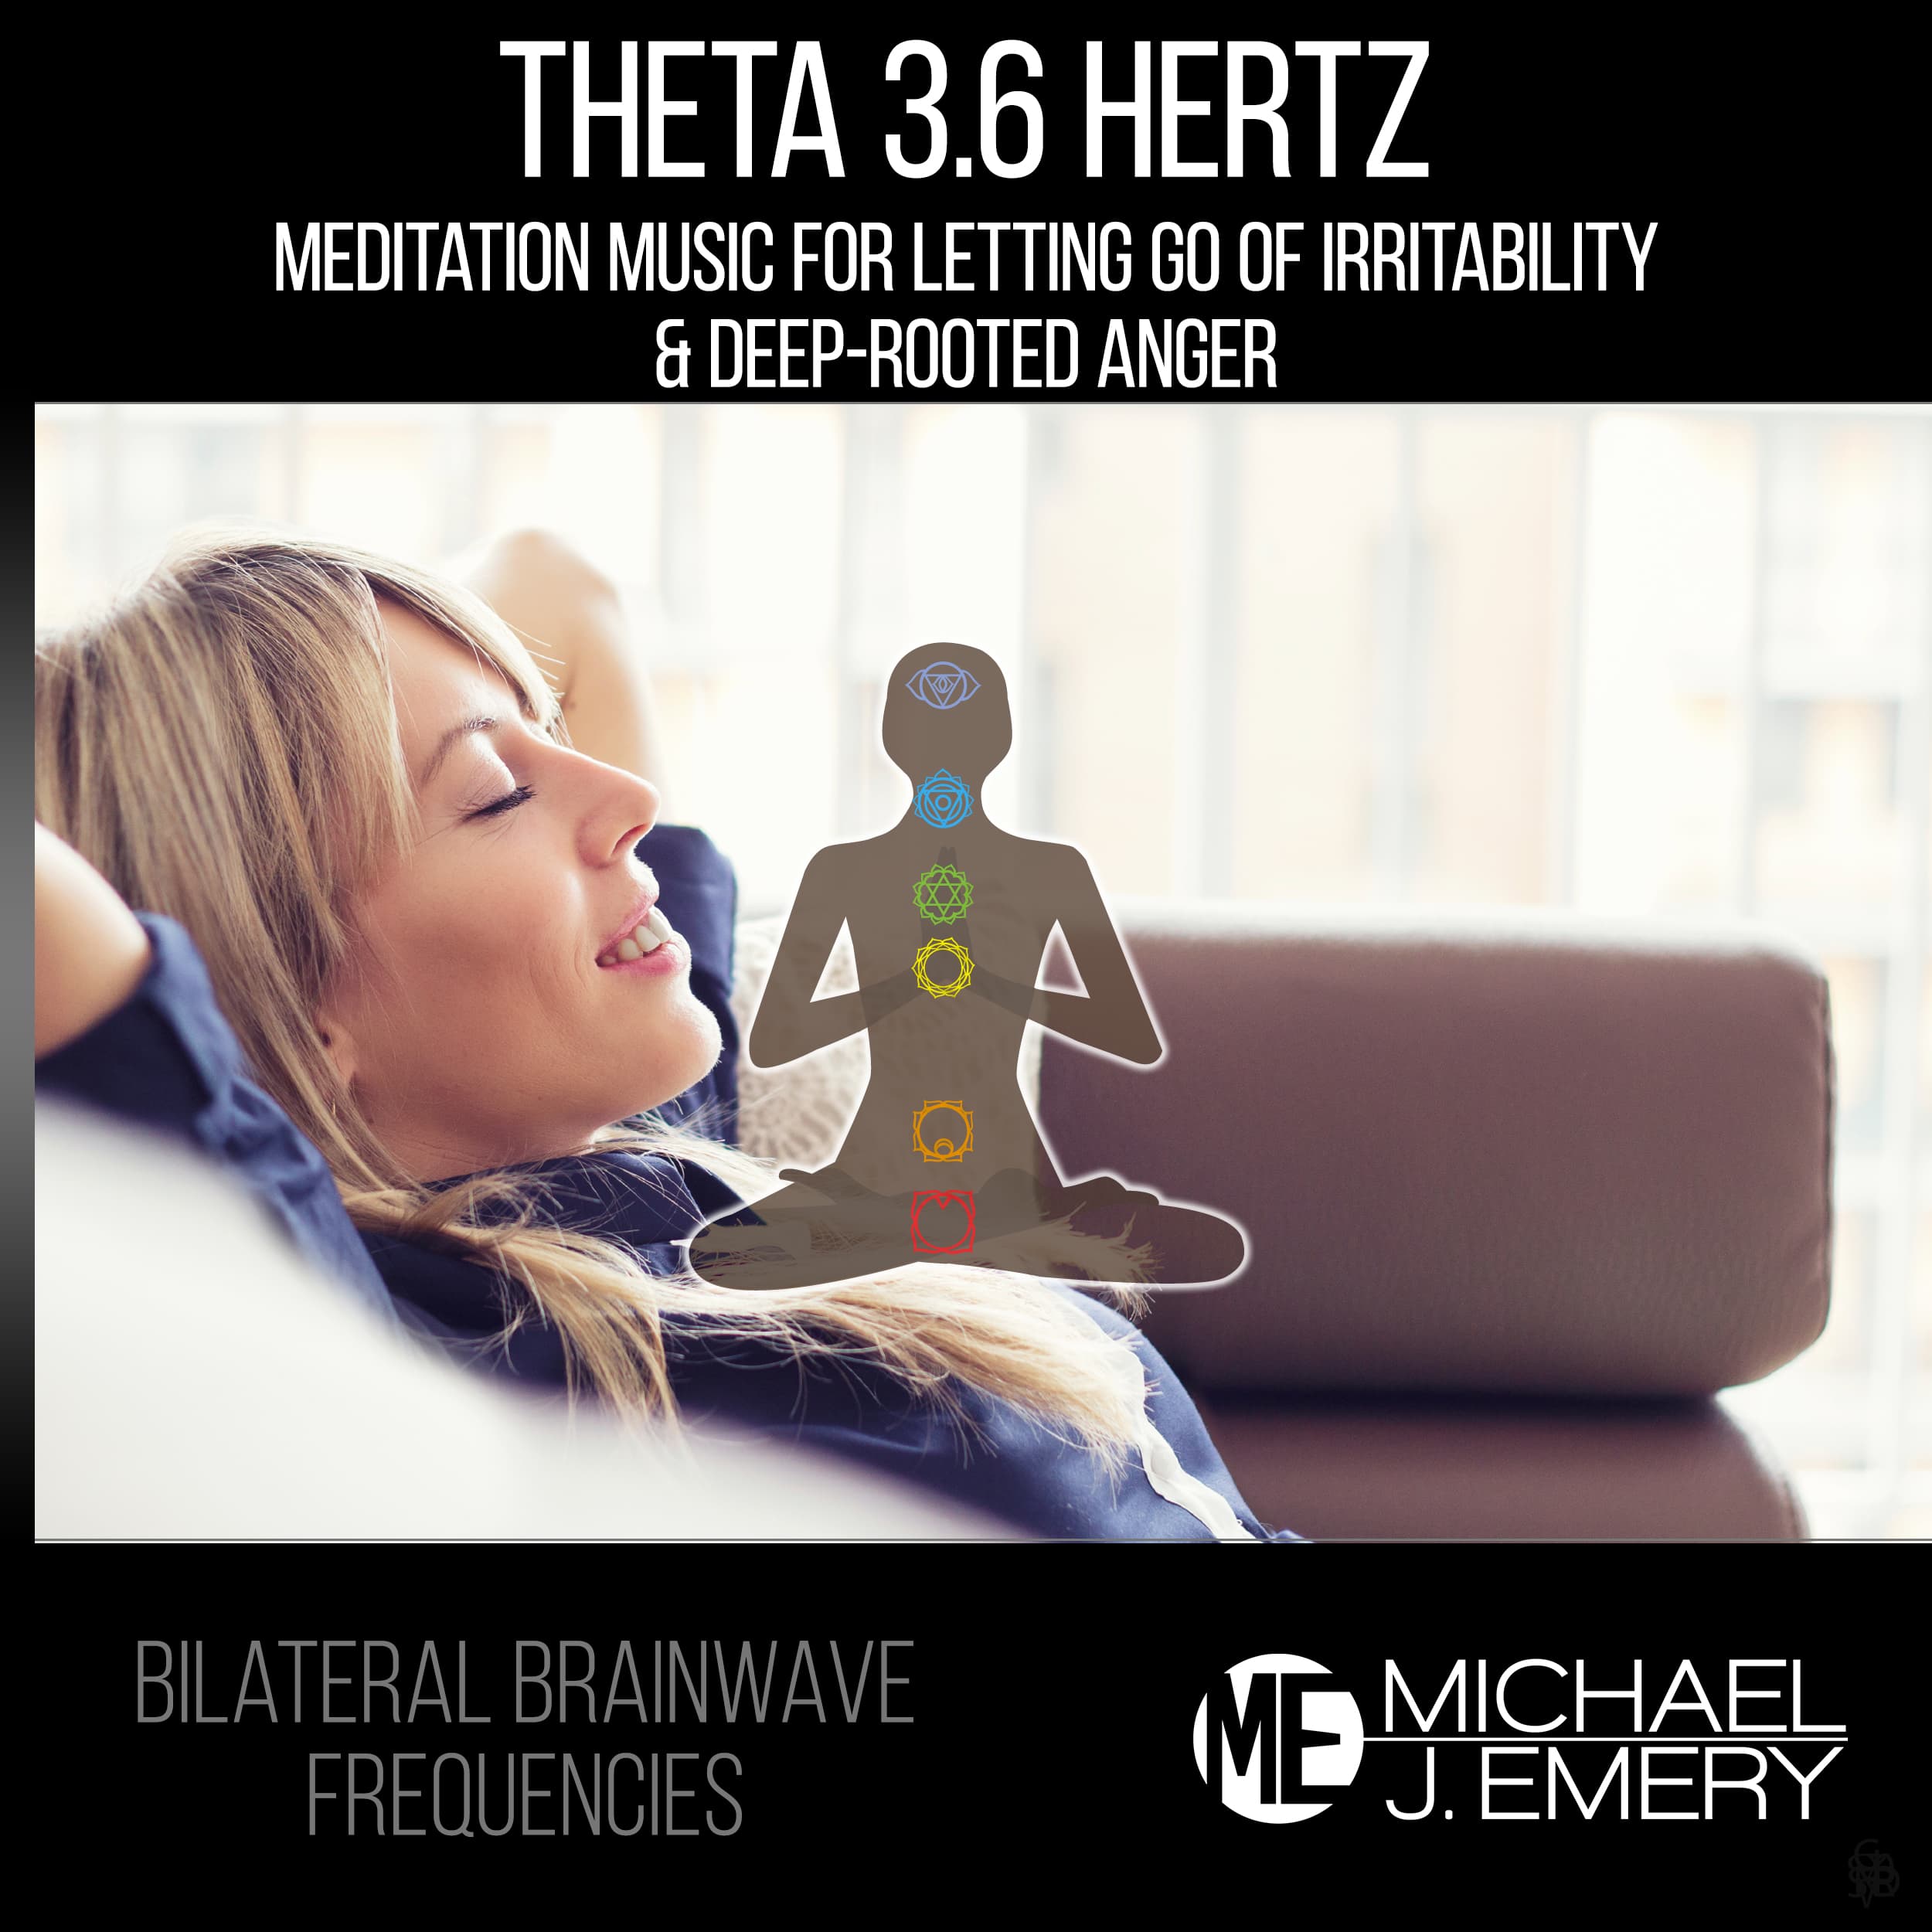 Theta-3.6-Hertz-Meditation-Music-For-Letting-Go-of-Irritability-and-Deep-Rooted-Anger-pichi